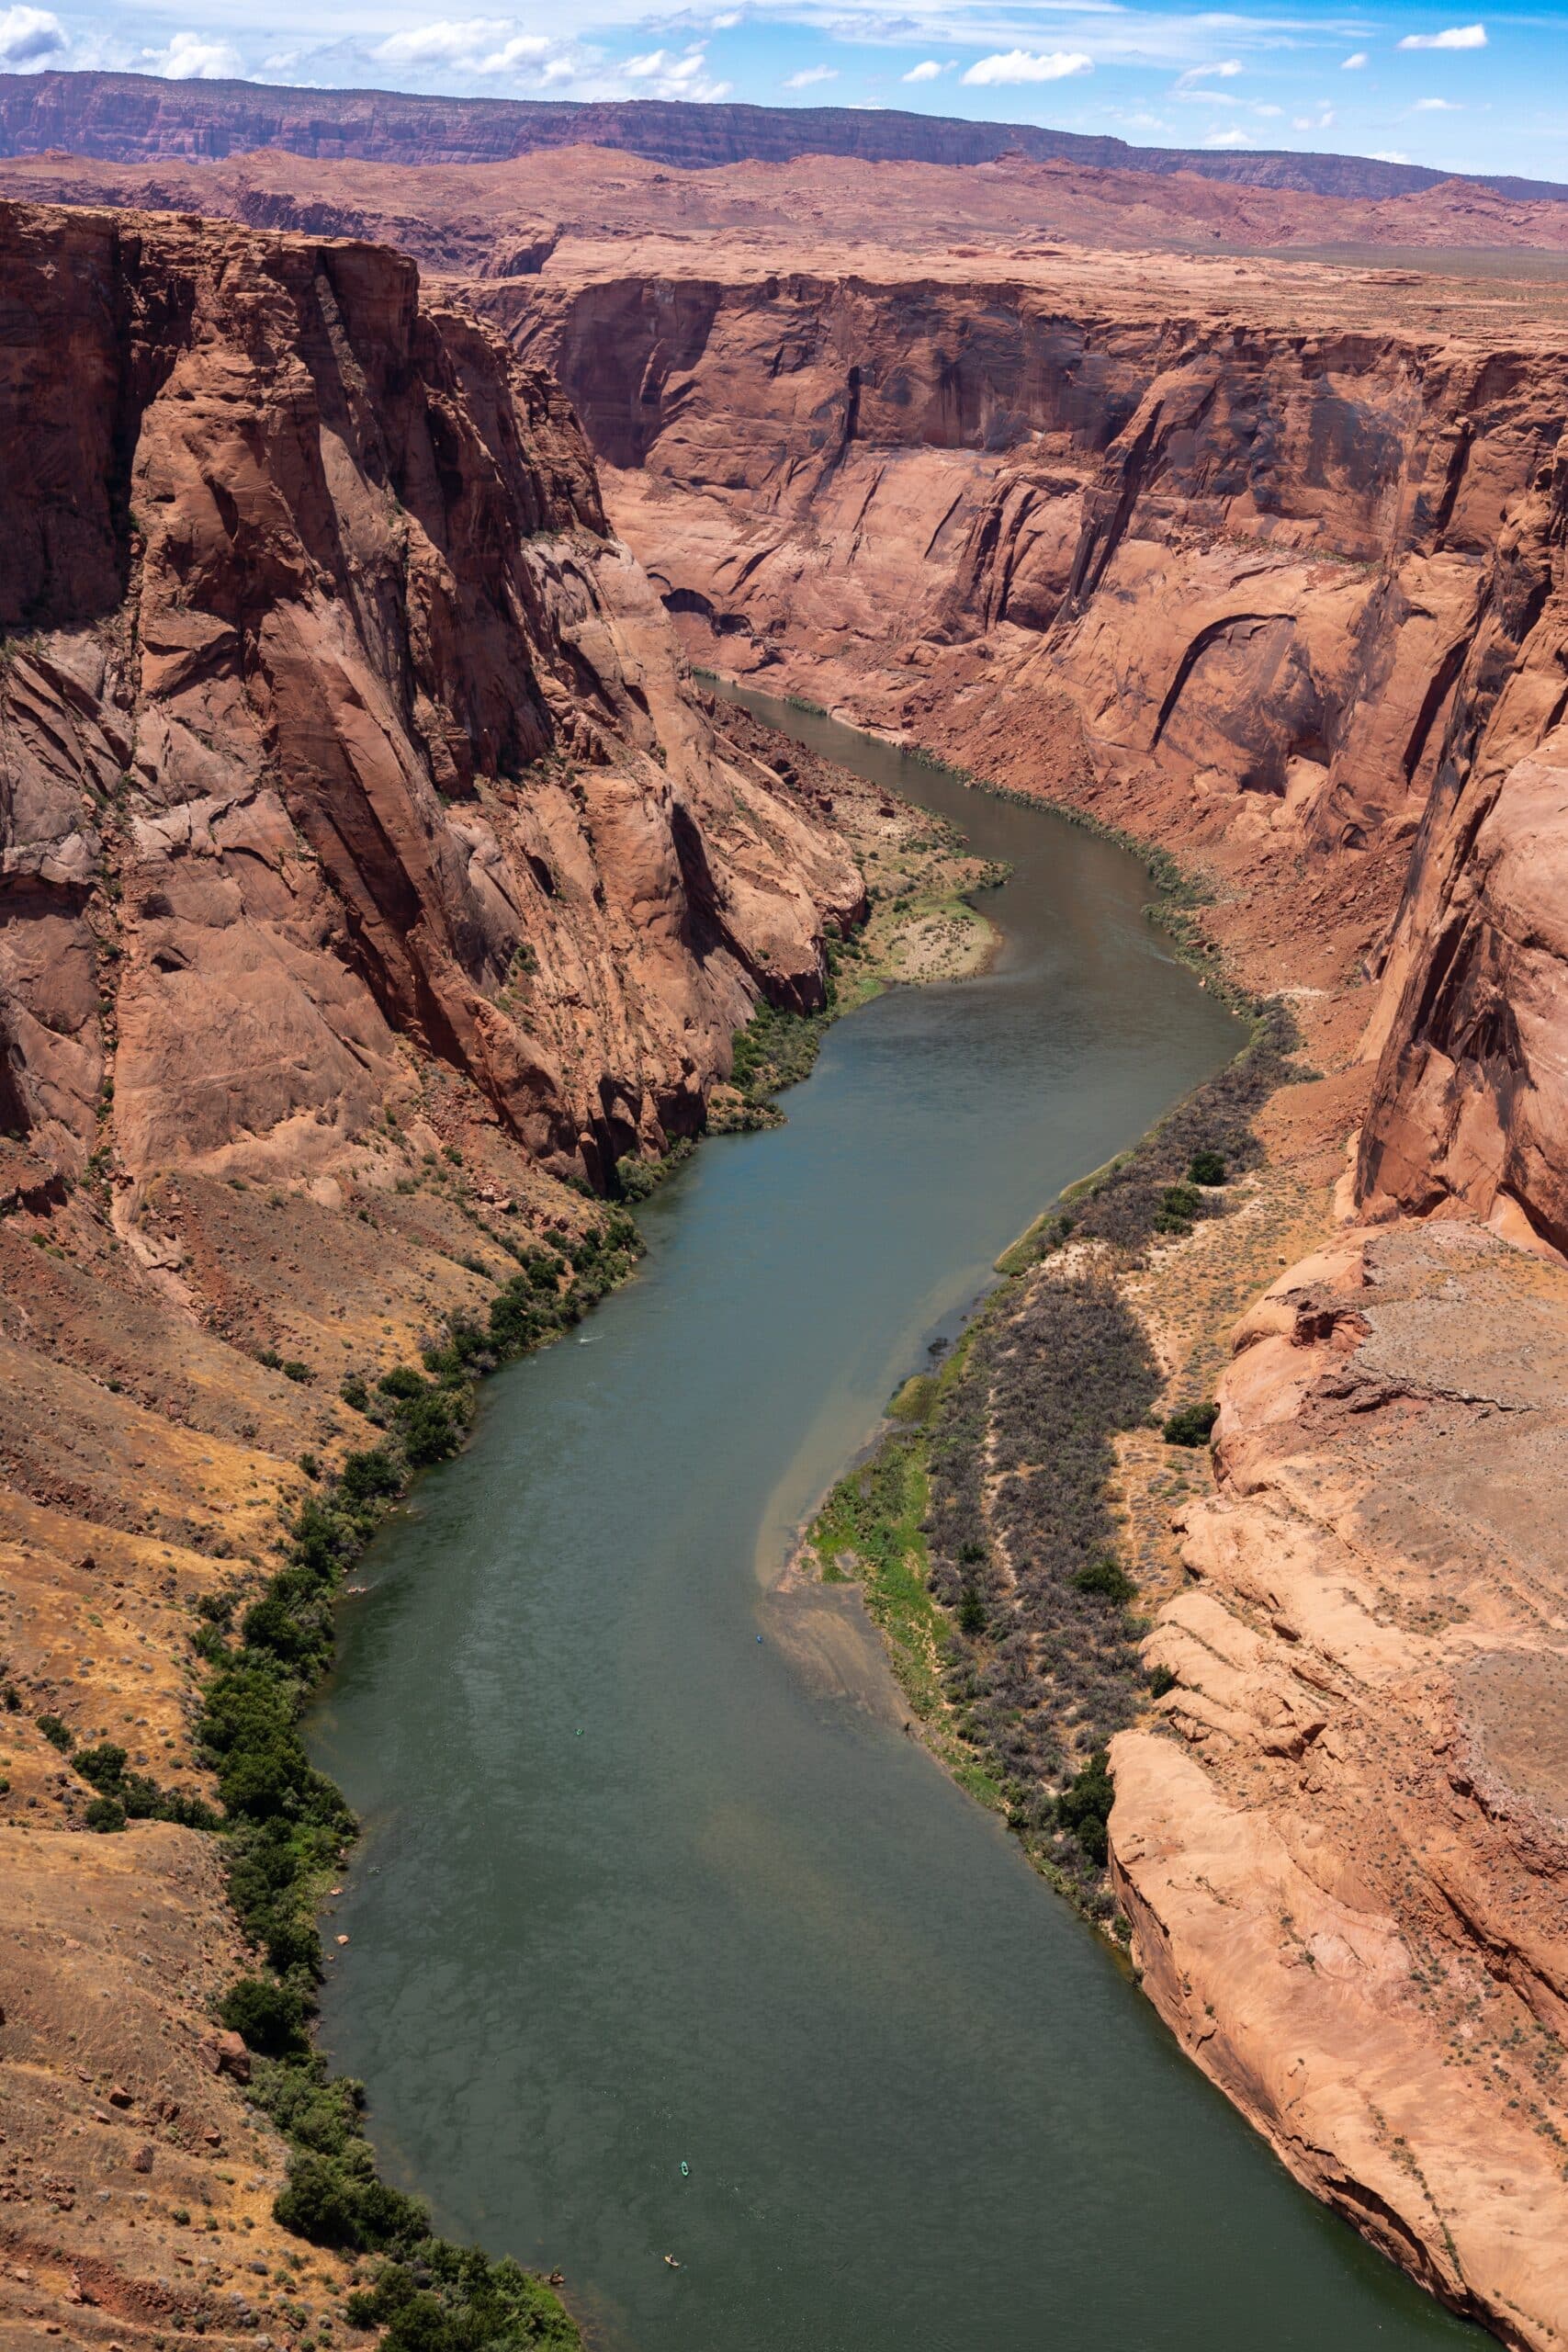 View of a river in a canyon.